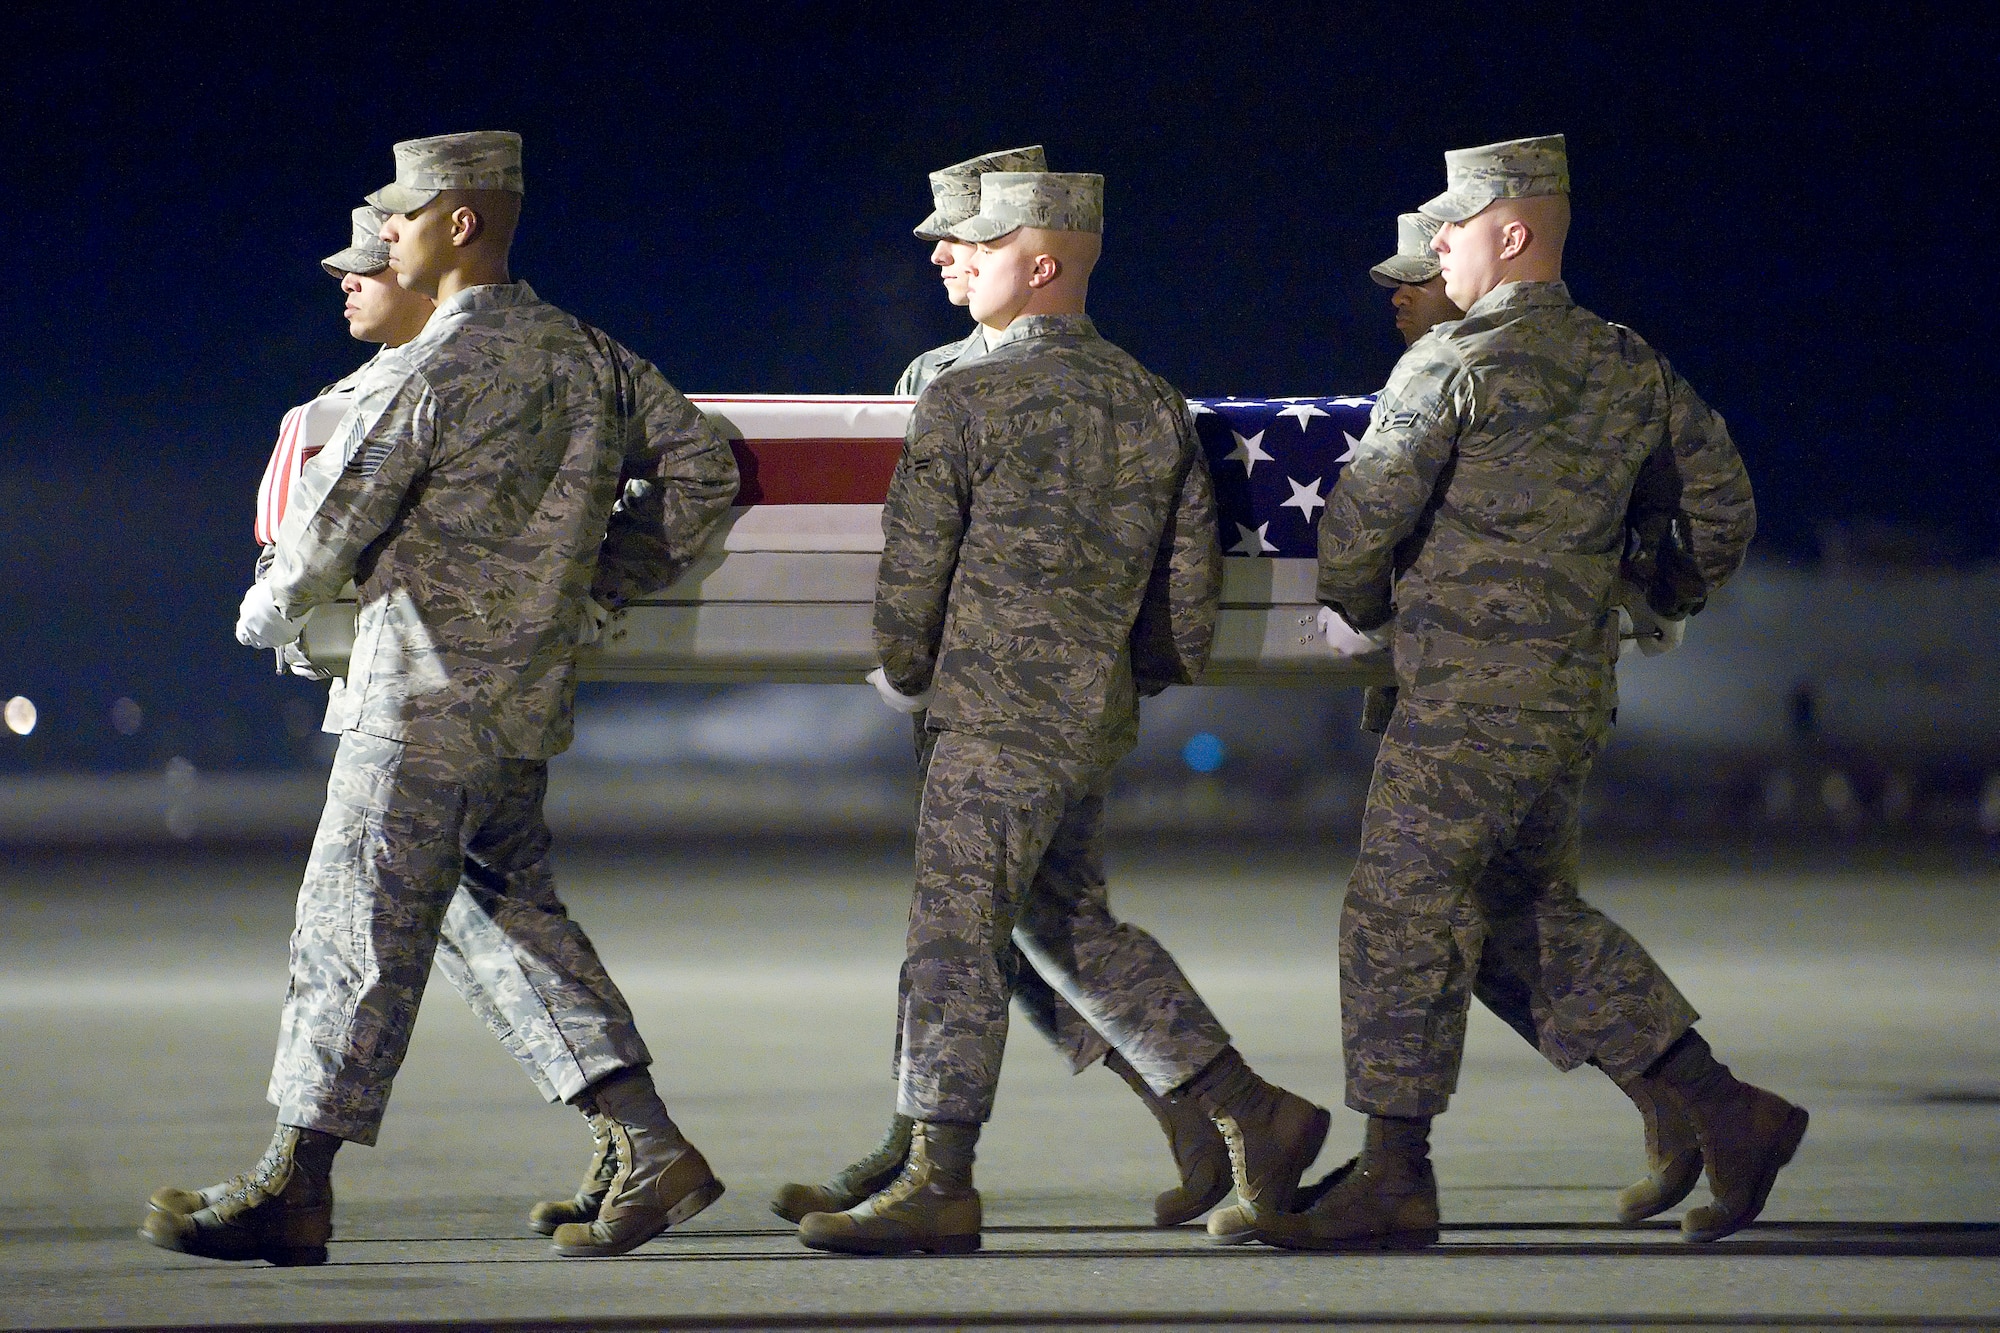 A U.S. Air Force carry team transfers the remains of Air Force Senior Airman Julian S. Scholten of Upper Marlboro, Md., at Dover Air Force Base, Del., Feb. 21, 2012. Scholten was assigned to the 25th Intelligence Squadron, Hurlburt Field, Fla. (U.S. Air Force photo/Adrian R. Rowan)
